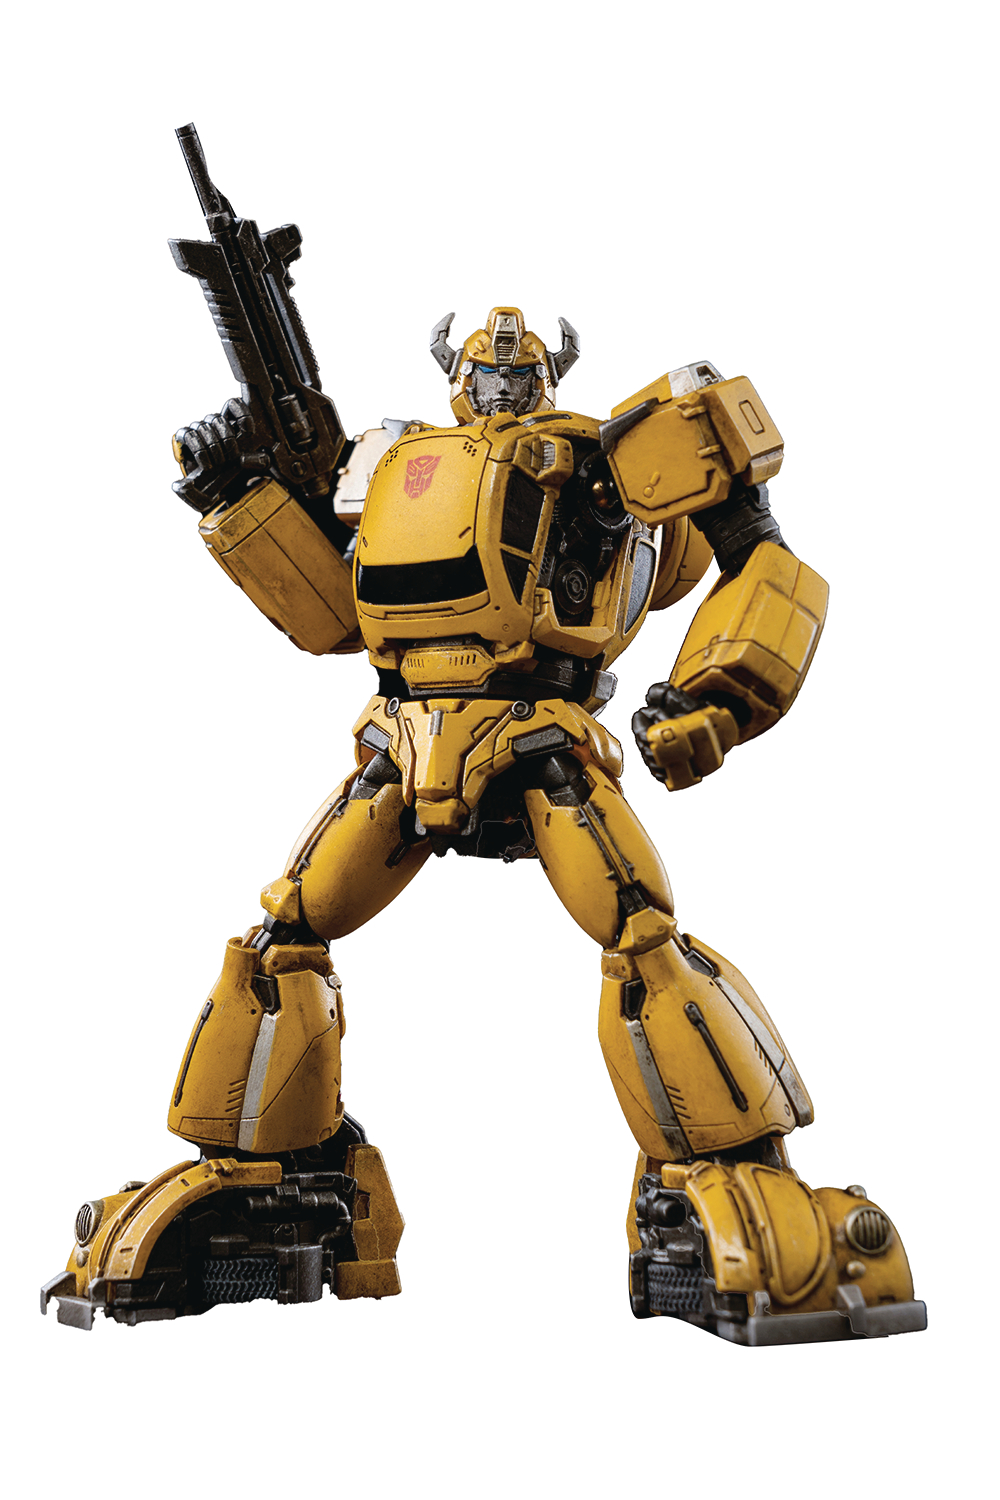 Transformers Mdlx Bumblebee Small Scale Articulated Figure